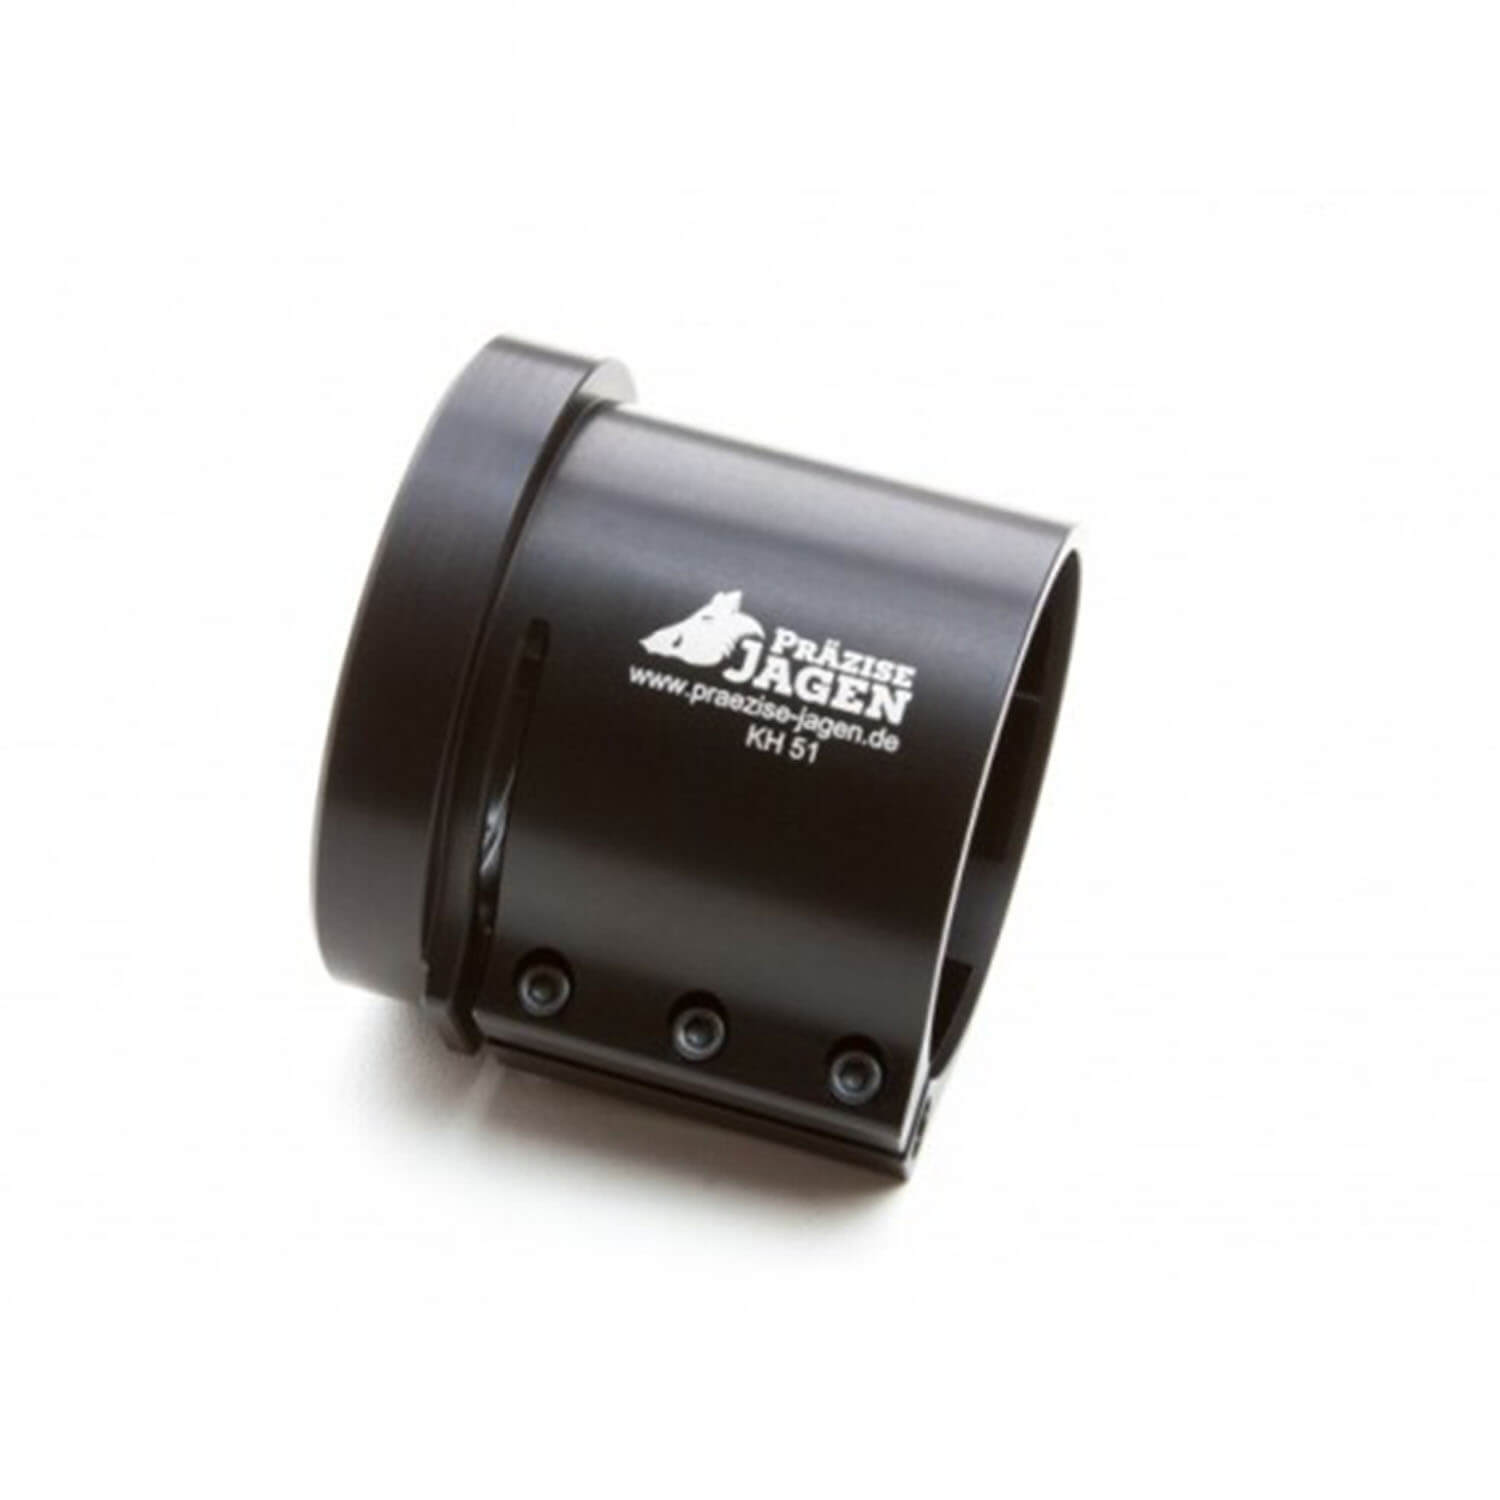 Telefix snap on adapter - Night Vision Devices